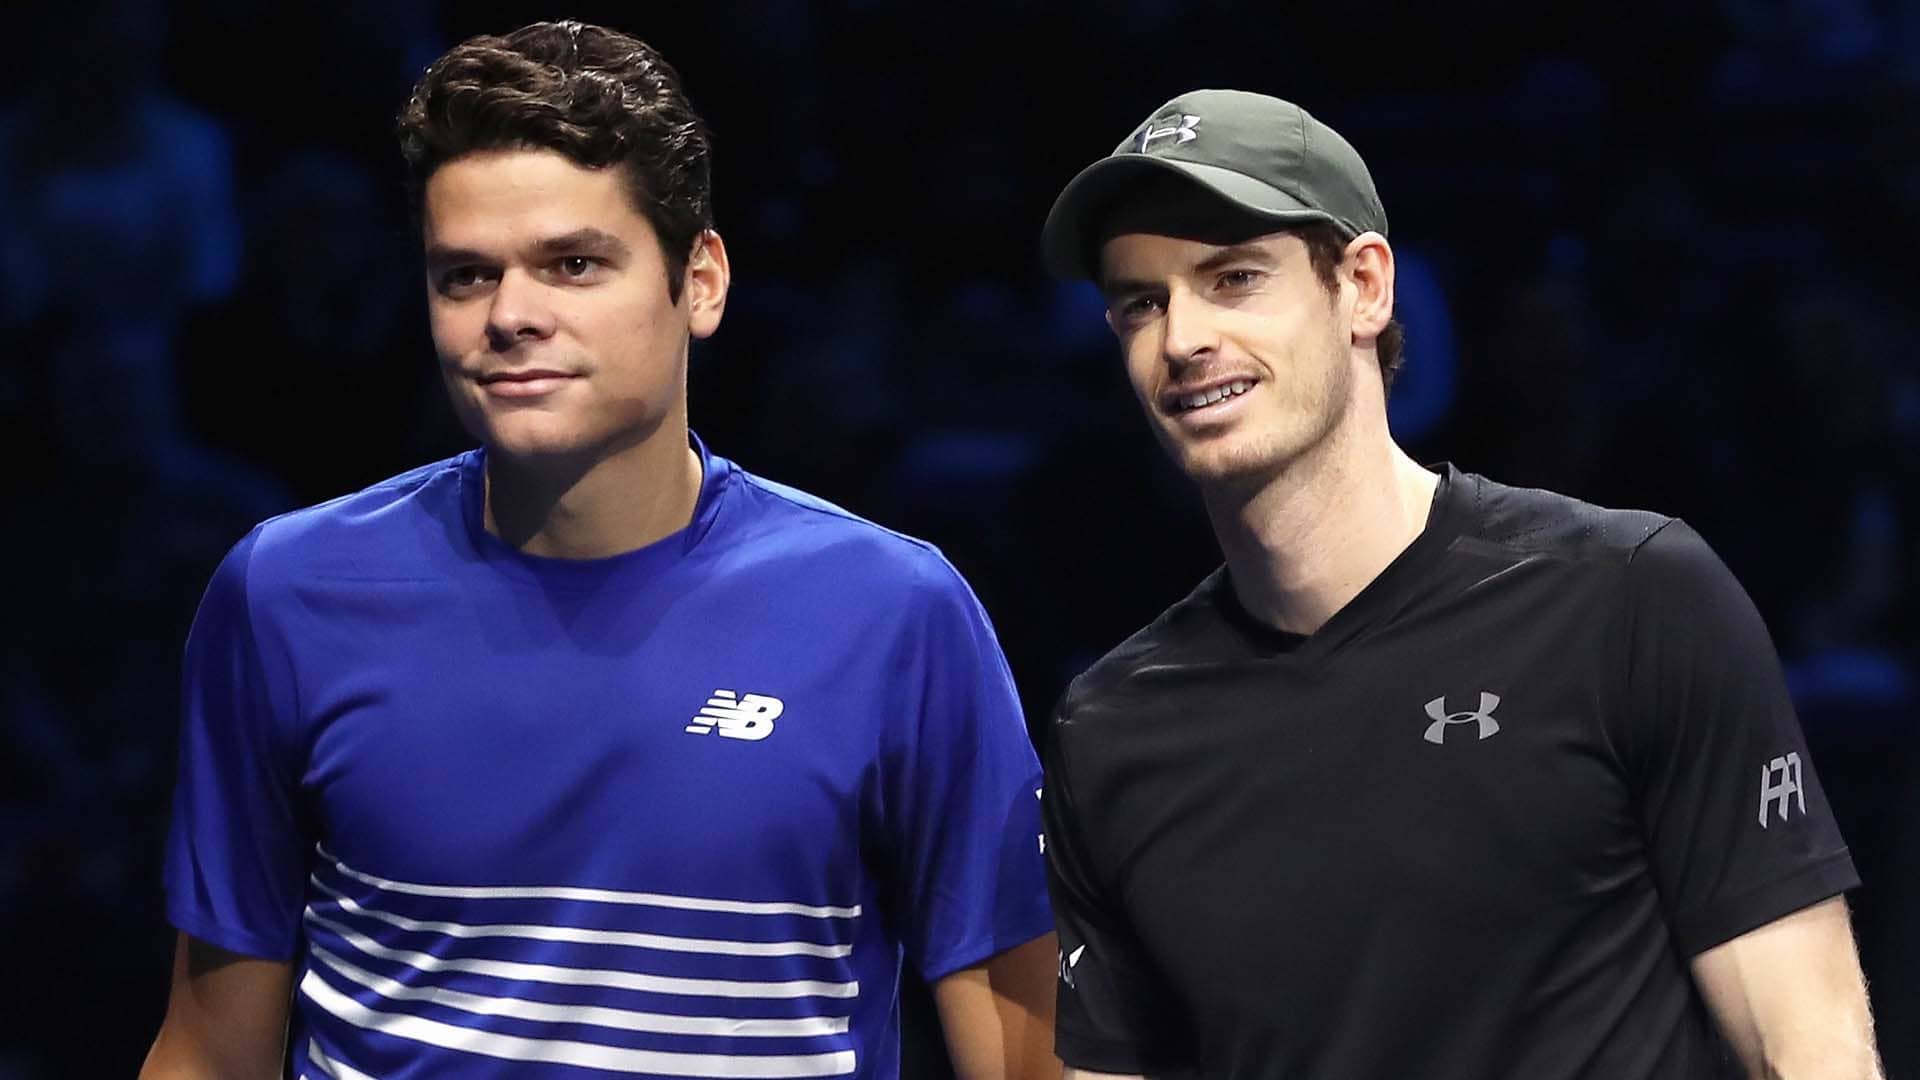 <a href='https://www.atptour.com/en/players/milos-raonic/r975/overview'>Milos Raonic</a> and <a href='https://www.atptour.com/en/players/andy-murray/mc10/overview'>Andy Murray</a> contested six ATP Head2Head contests in 2016.